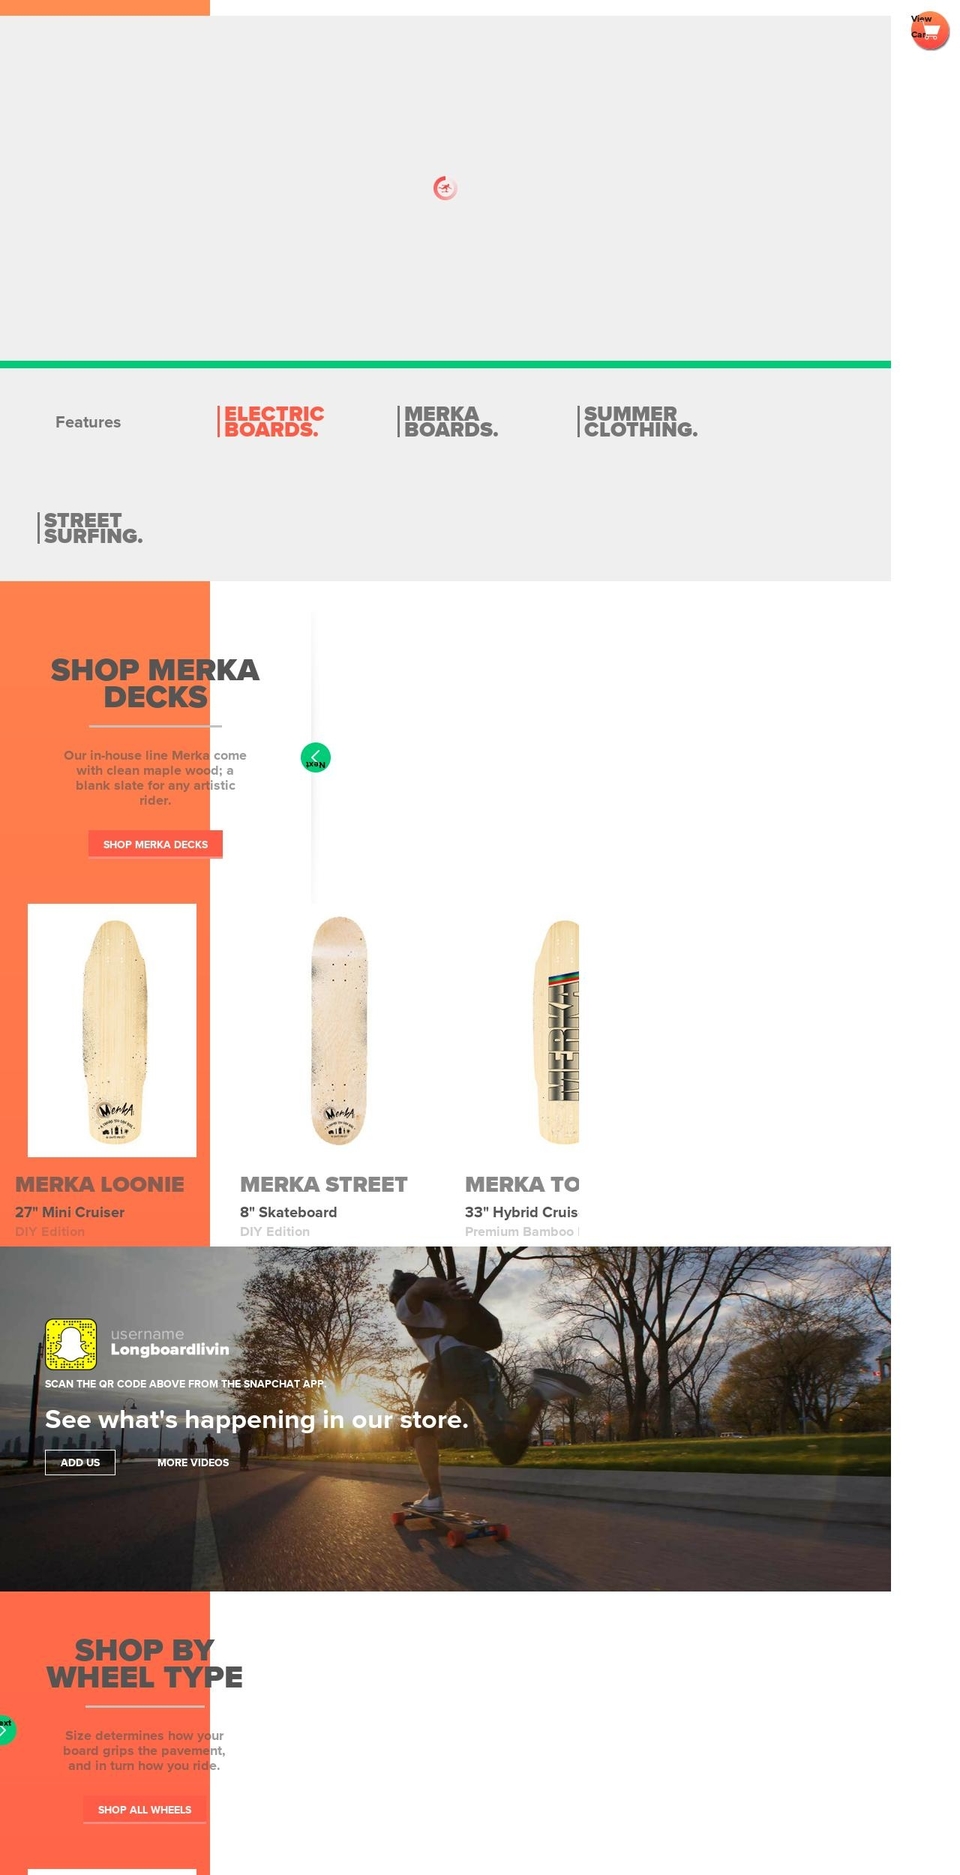 Ride Shopify theme site example longboardliving.com